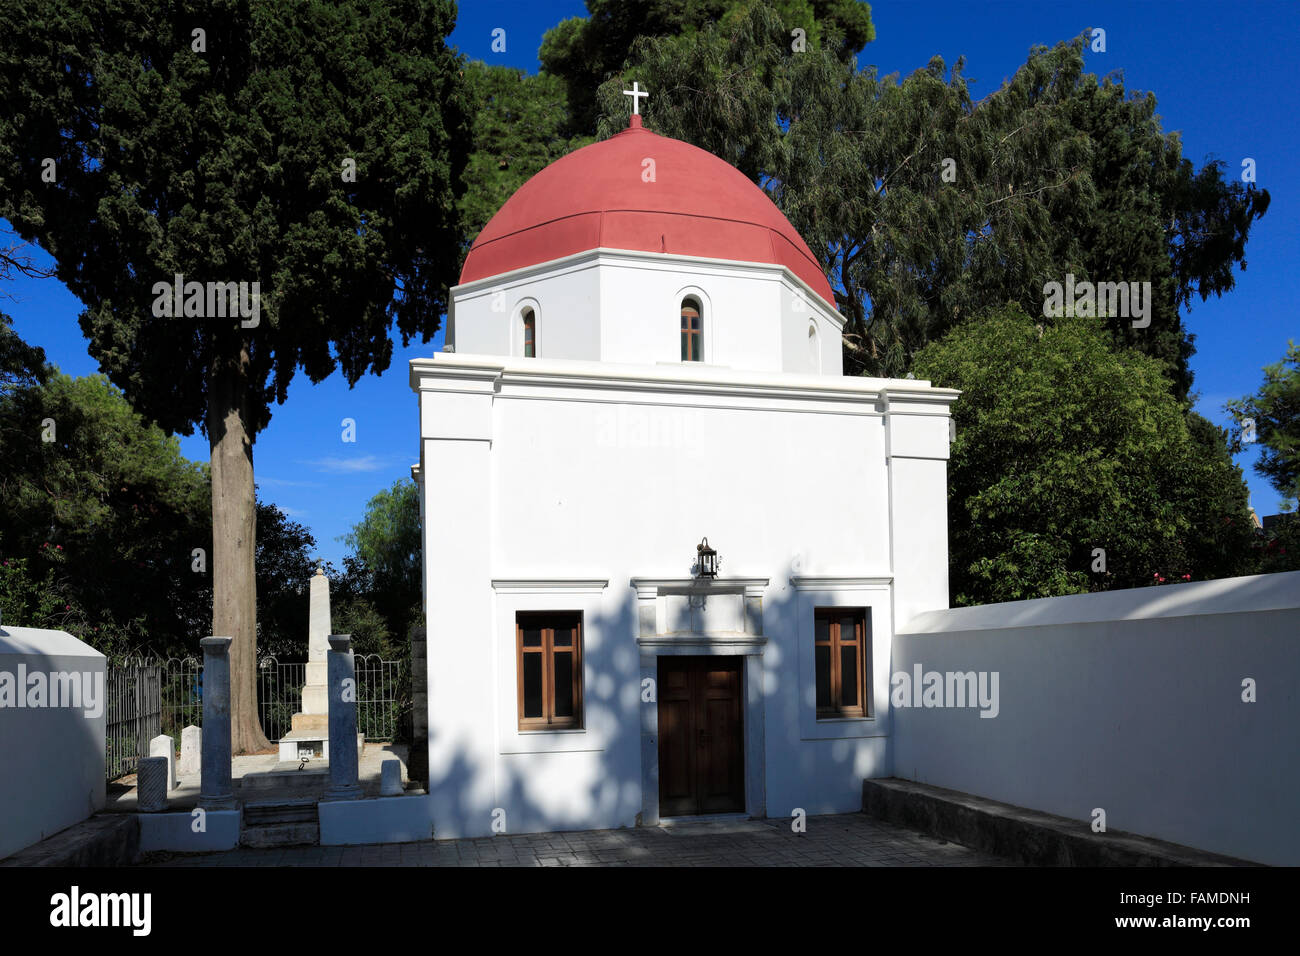 St Georges church, Ancient Agora, Kos Town, Kos Island, Dodecanese group of islands, South Aegean Sea, Greece. Stock Photo